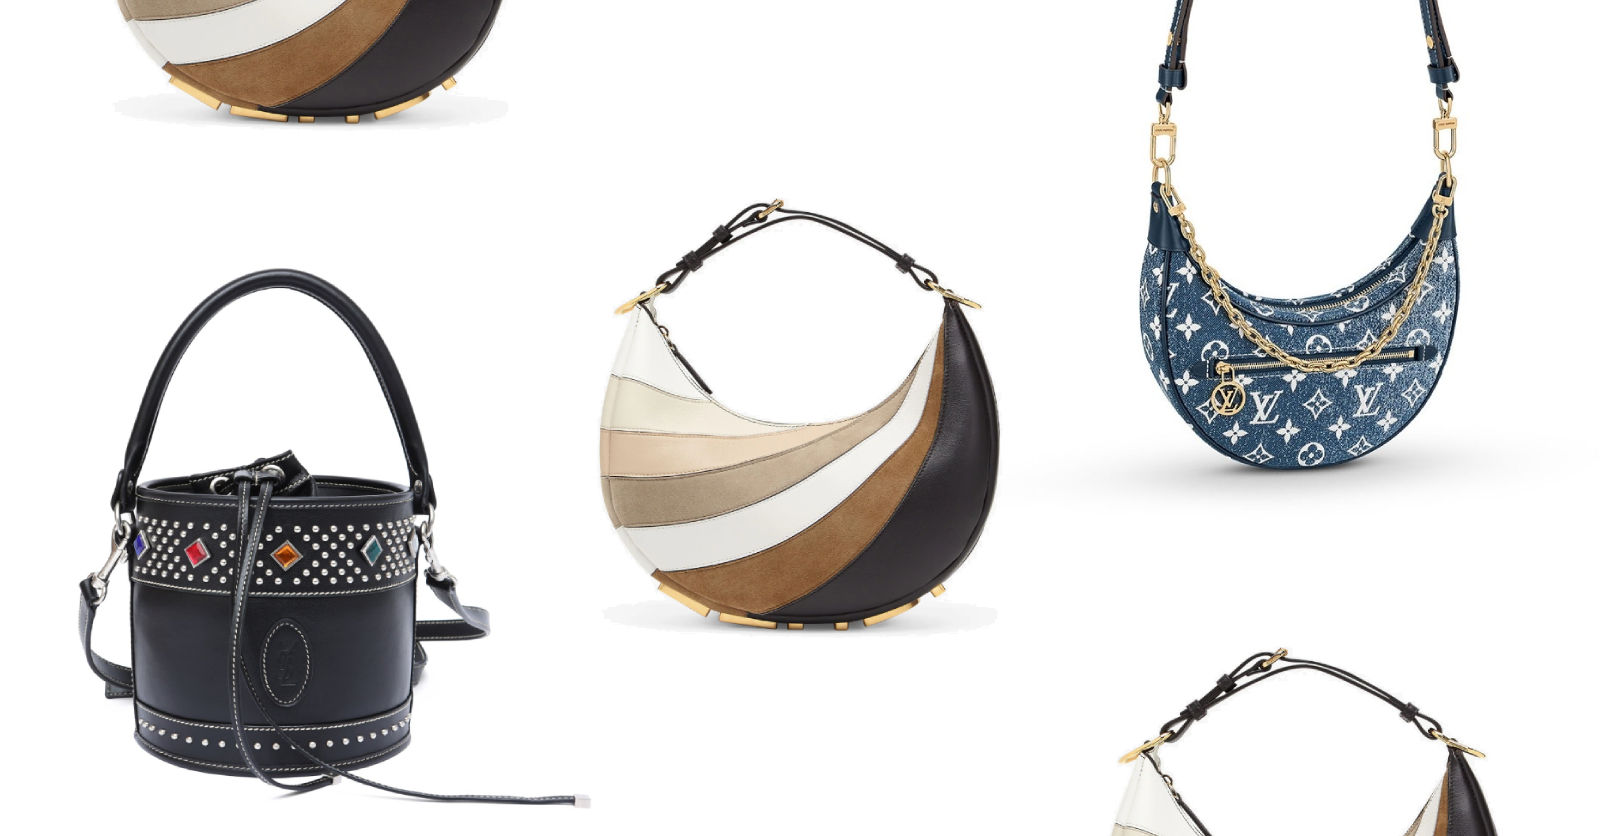 The Fendigraphy handbag and more new luxury bags to love